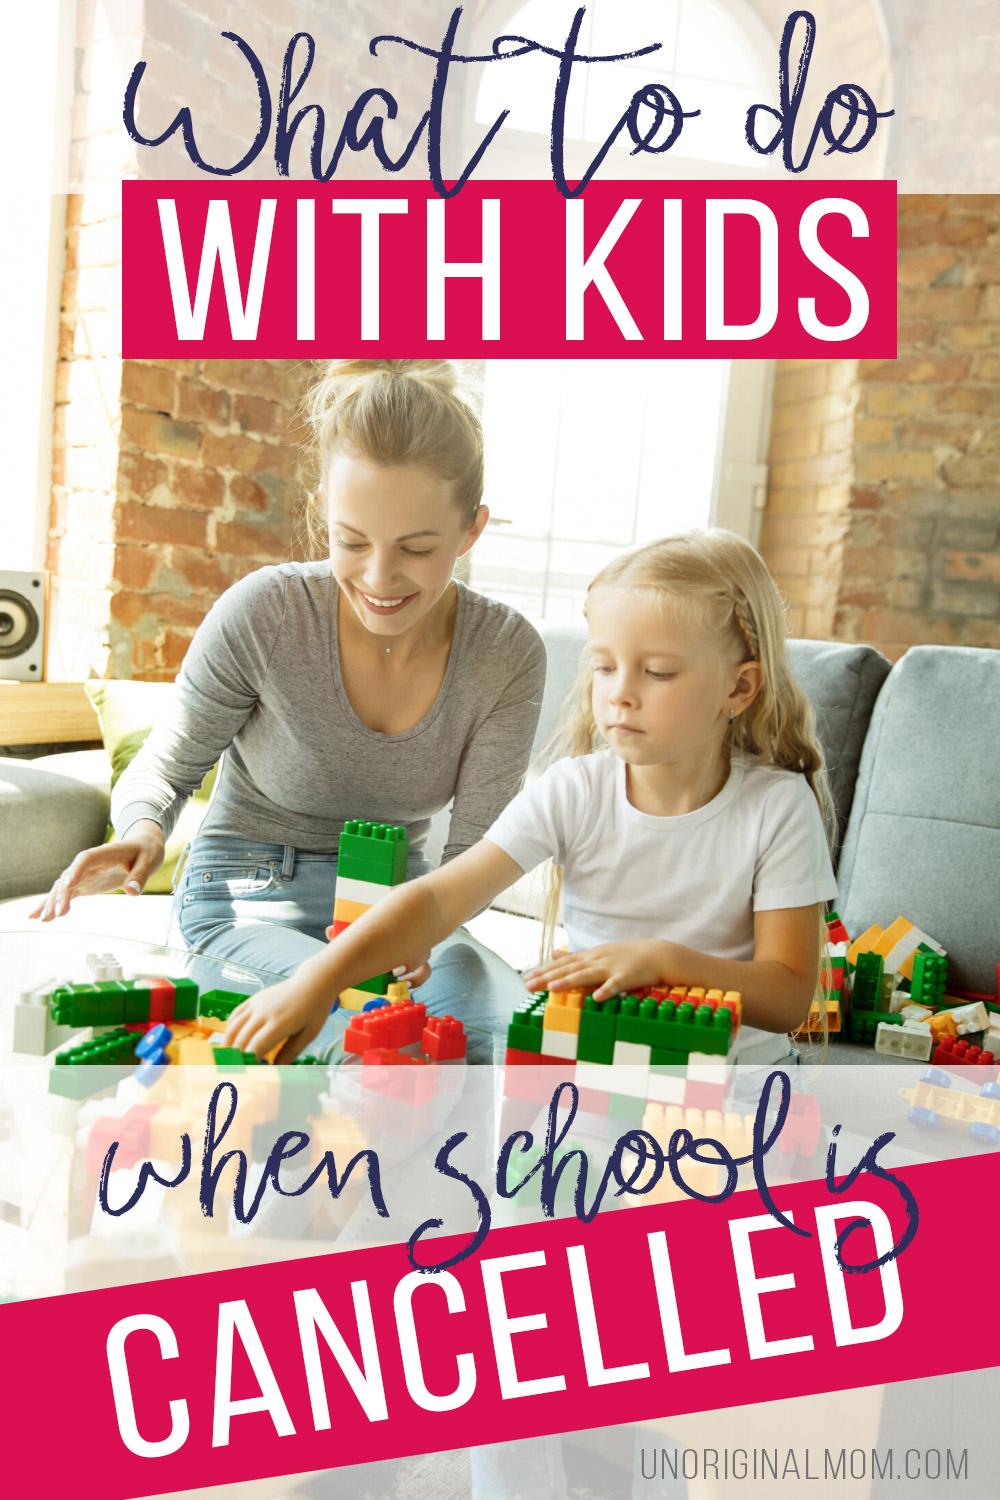 Ideas and tips for what to do with kids when school is cancelled. A sample schedule, ideas for activities, and suggestions on how to structure your day when faced with school closures.